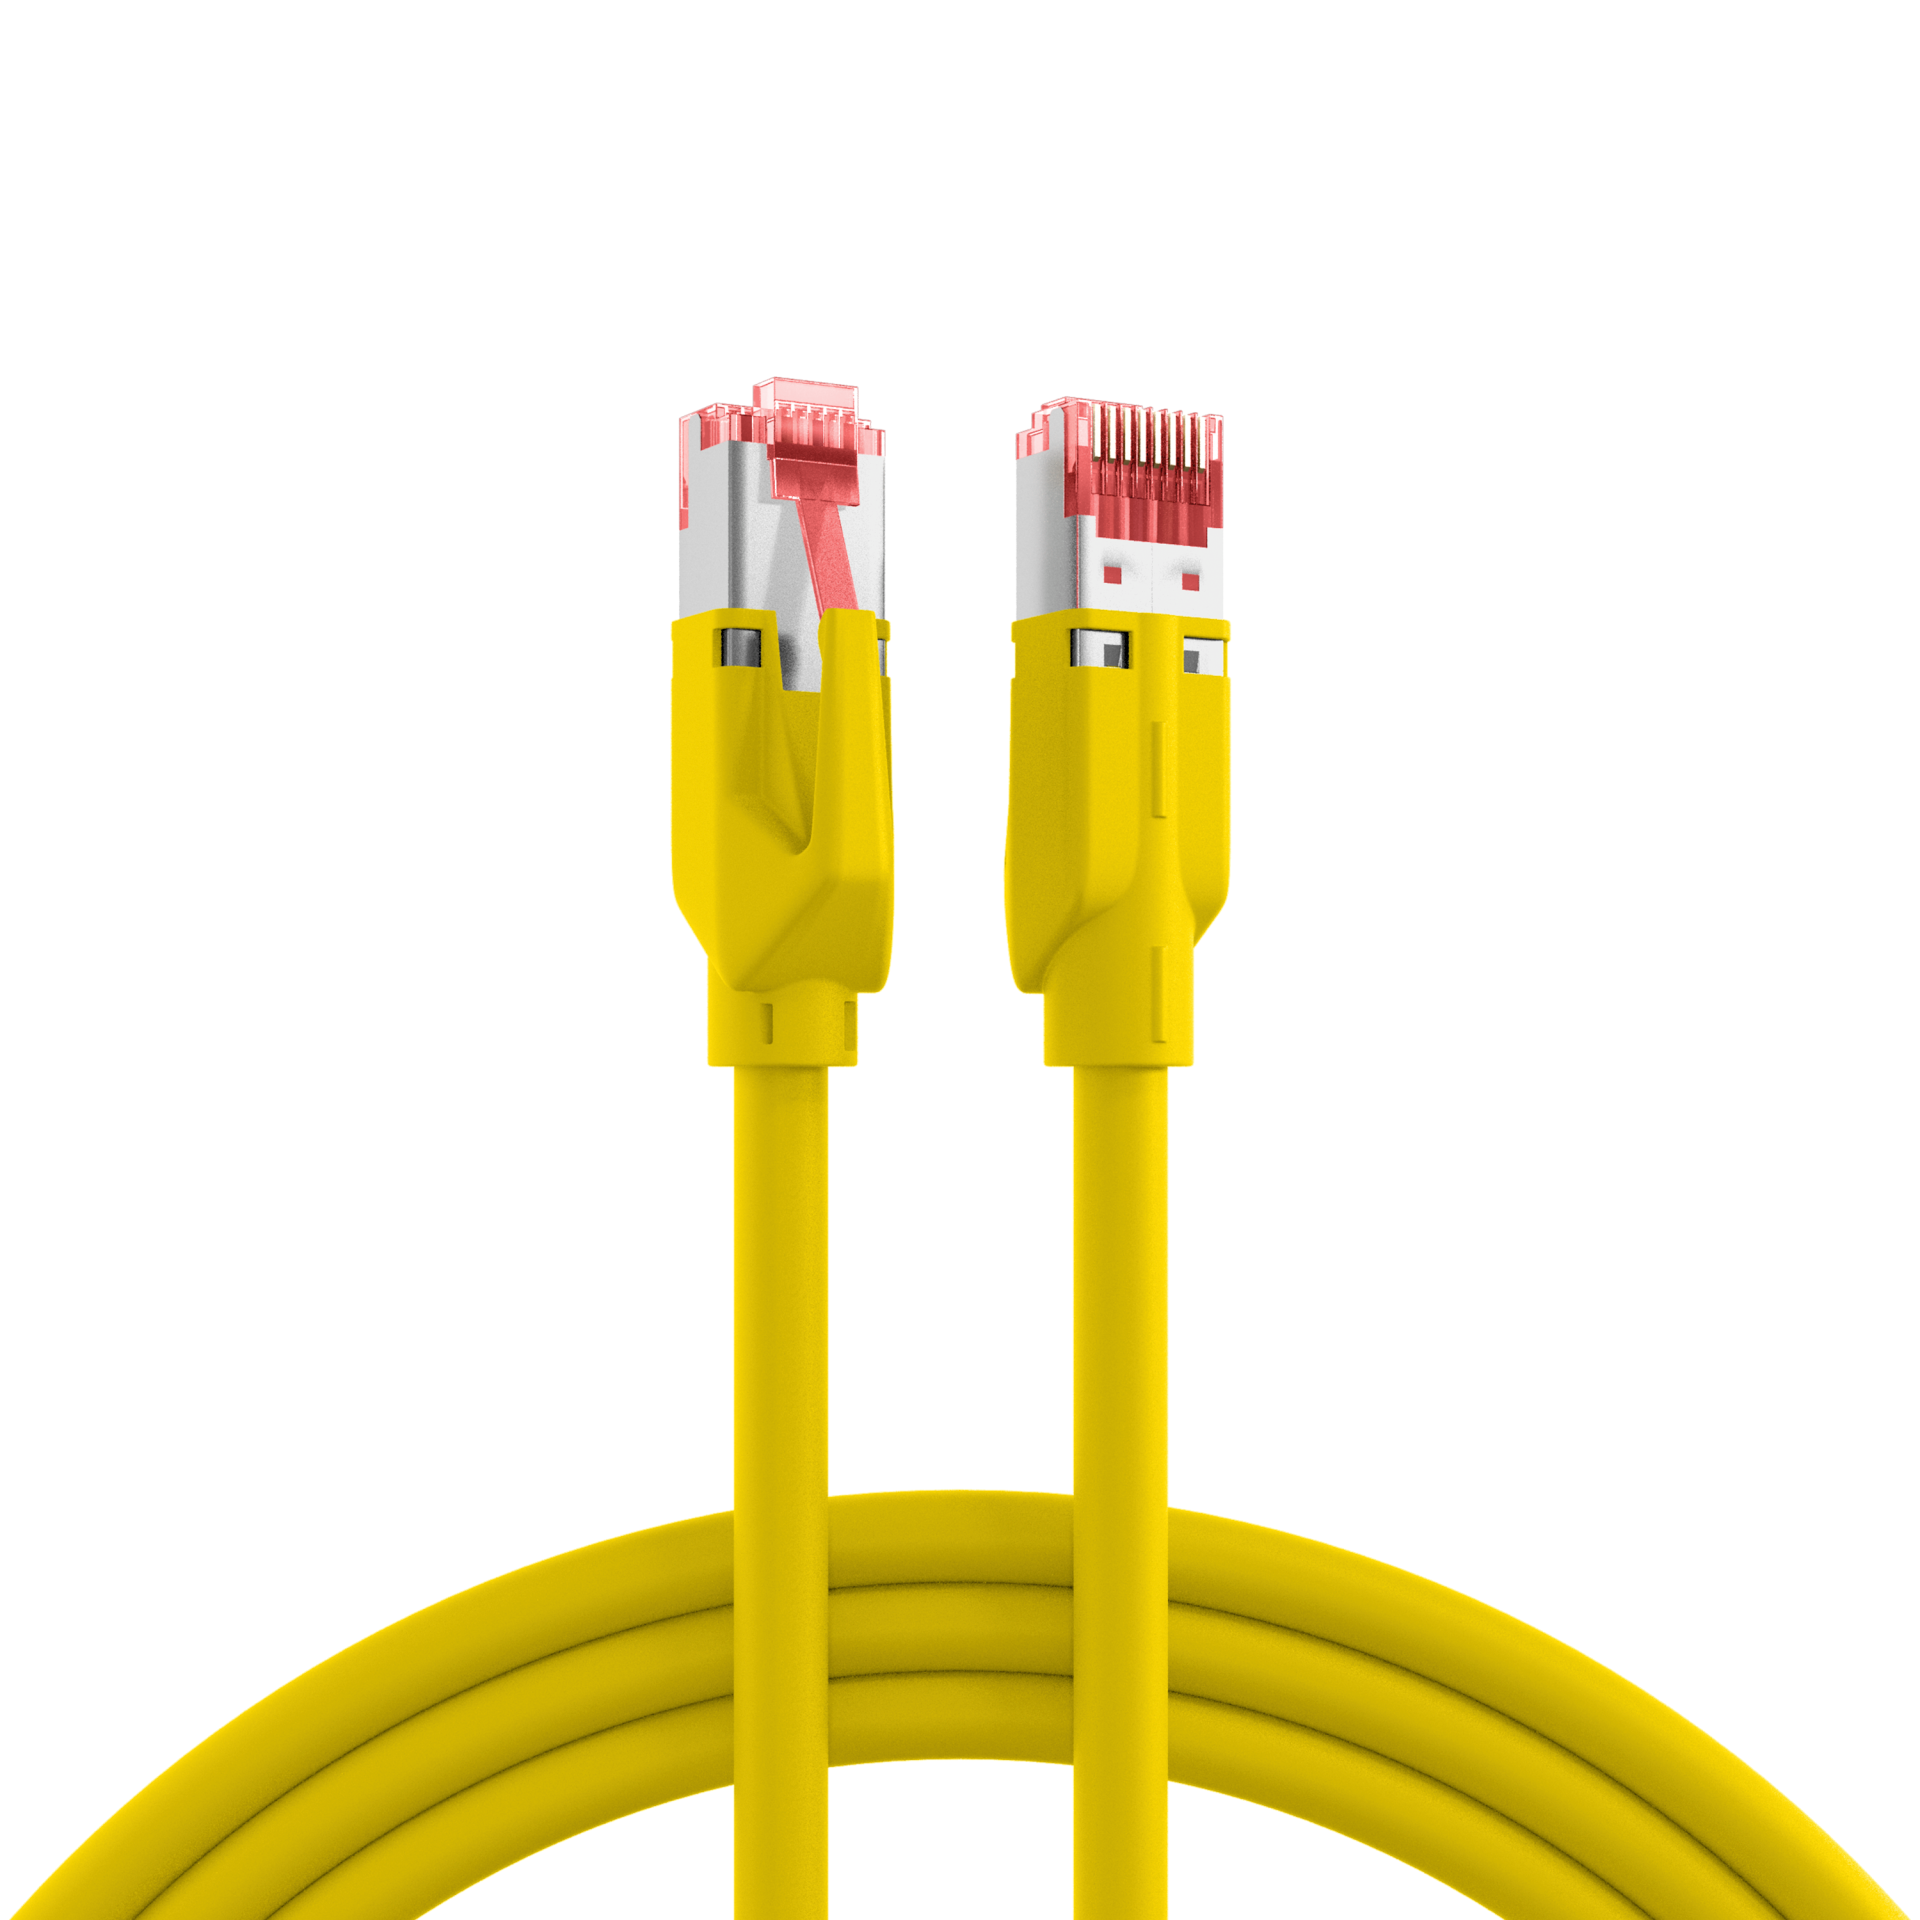 RJ45 Patch Cord Cat.5e SF/UTP PURTM21 for drag chains yellow 7m